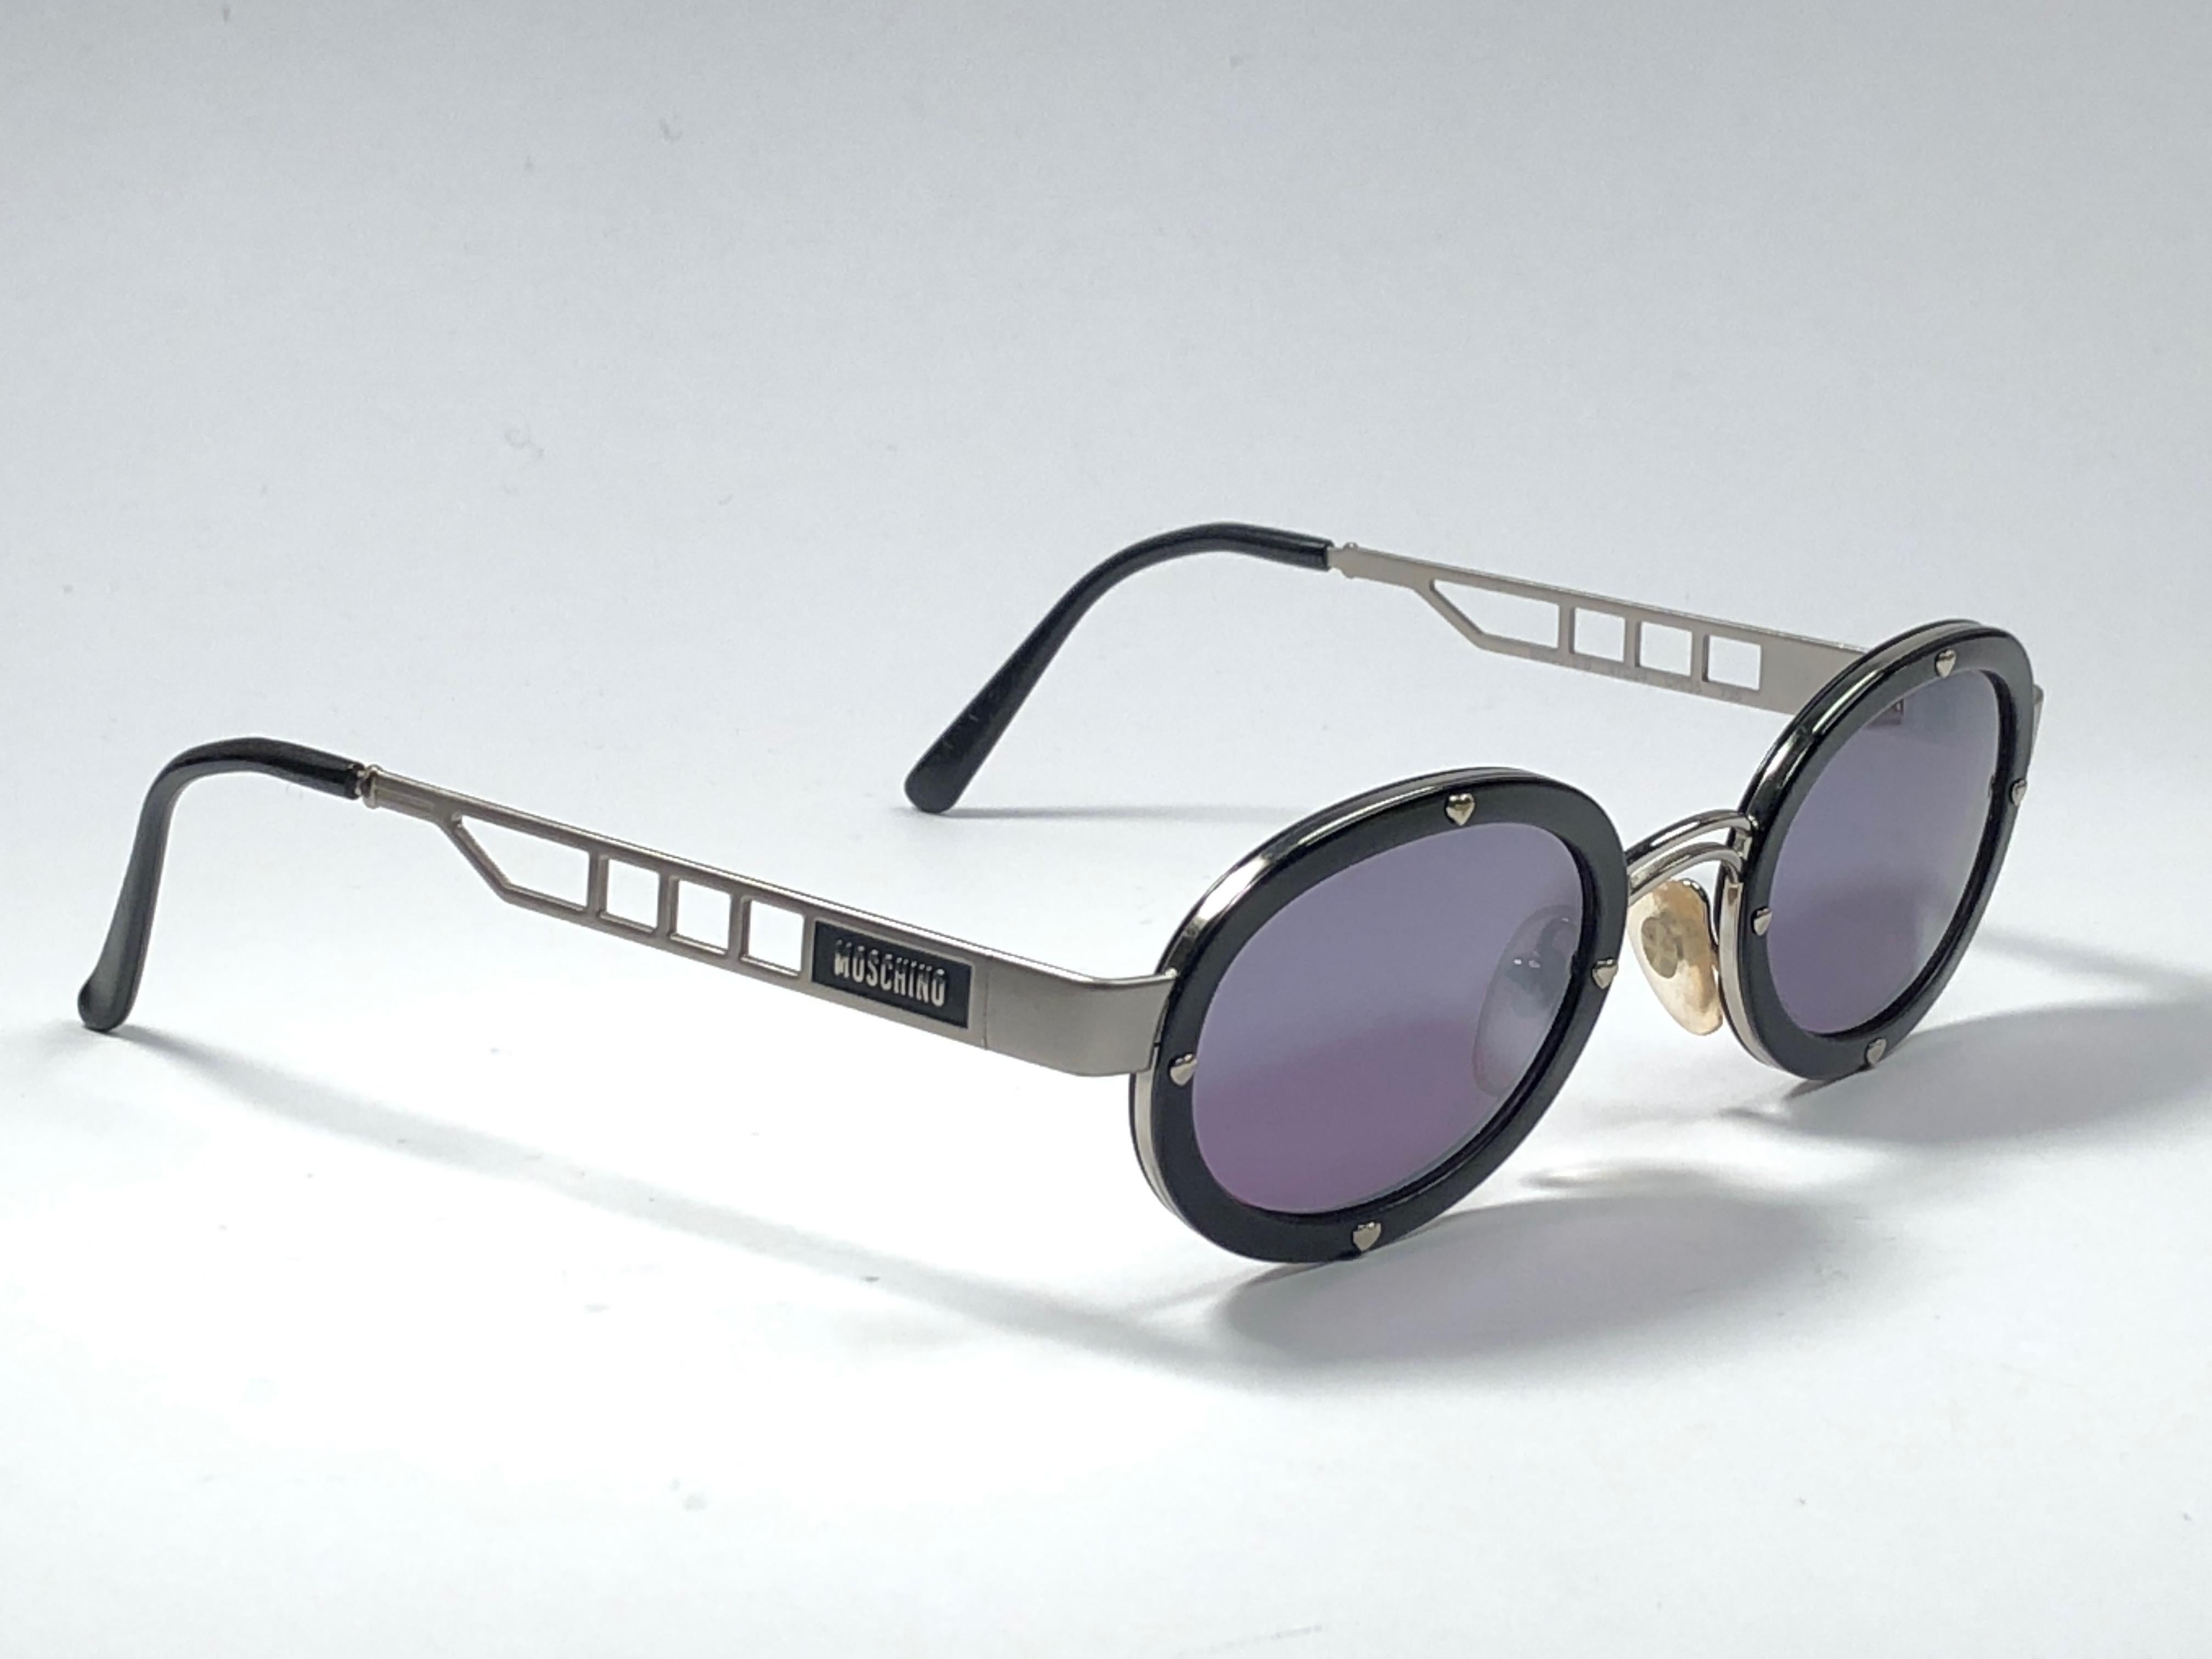 New Vintage Moschino small oval black matte frame with mirror silver lenses.

Made in Italy.
 
Produced and design in 1990's.

New, never worn or displayed.
